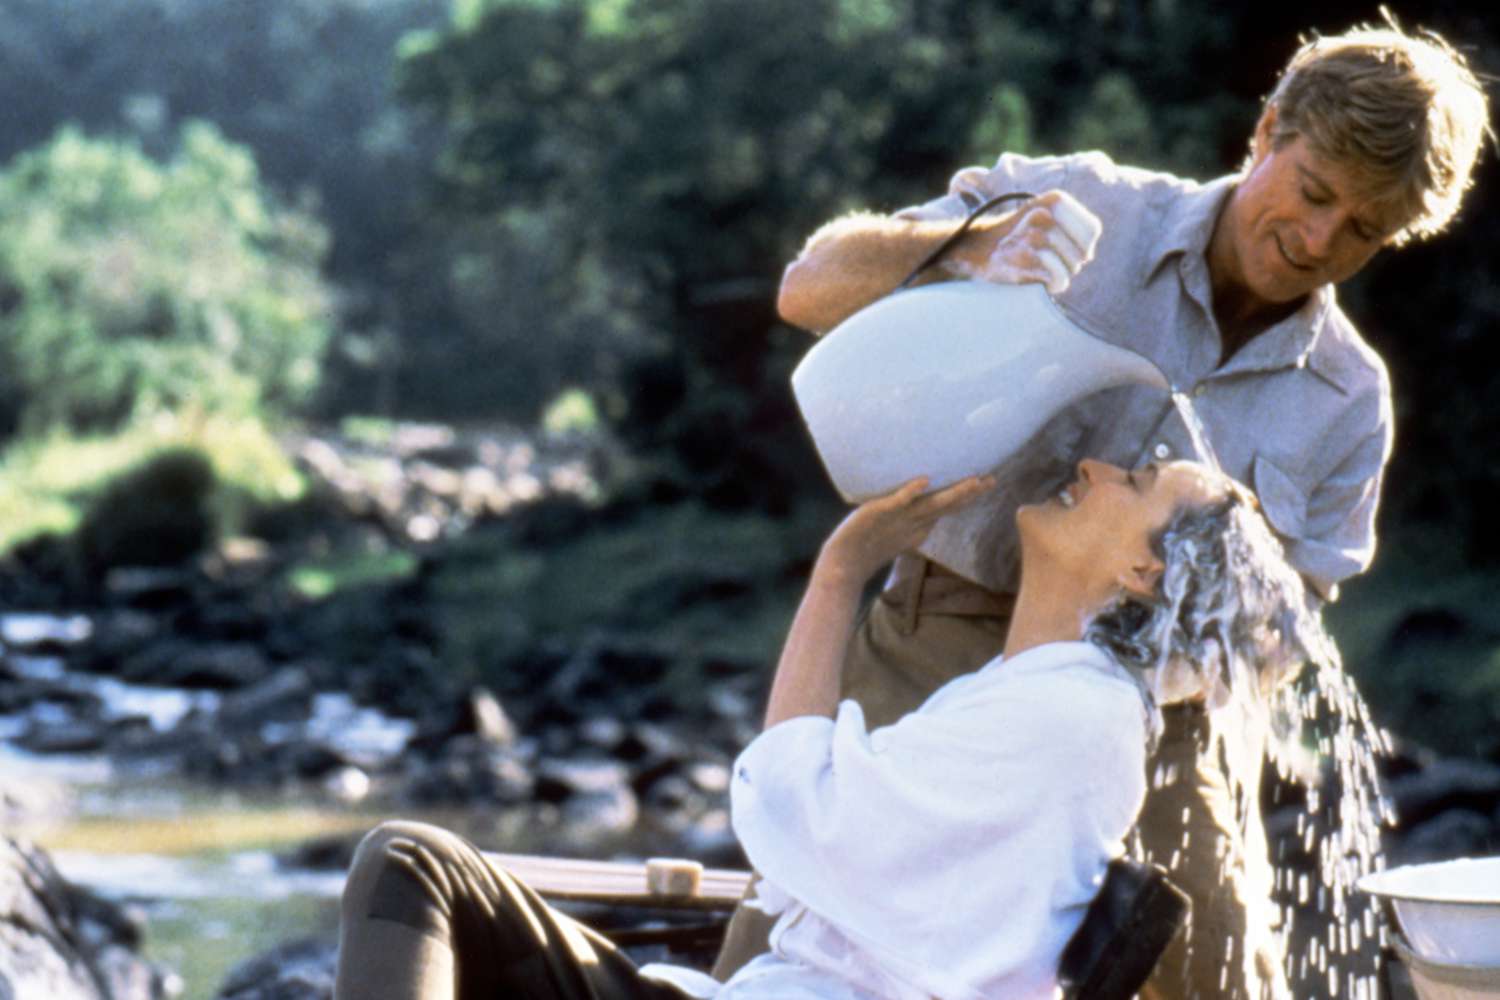 Meryl Streep Recalls 'Intimate' “Out of Africa” Shampoo Scene with Robert Redford: 'Didn't Want It to End'